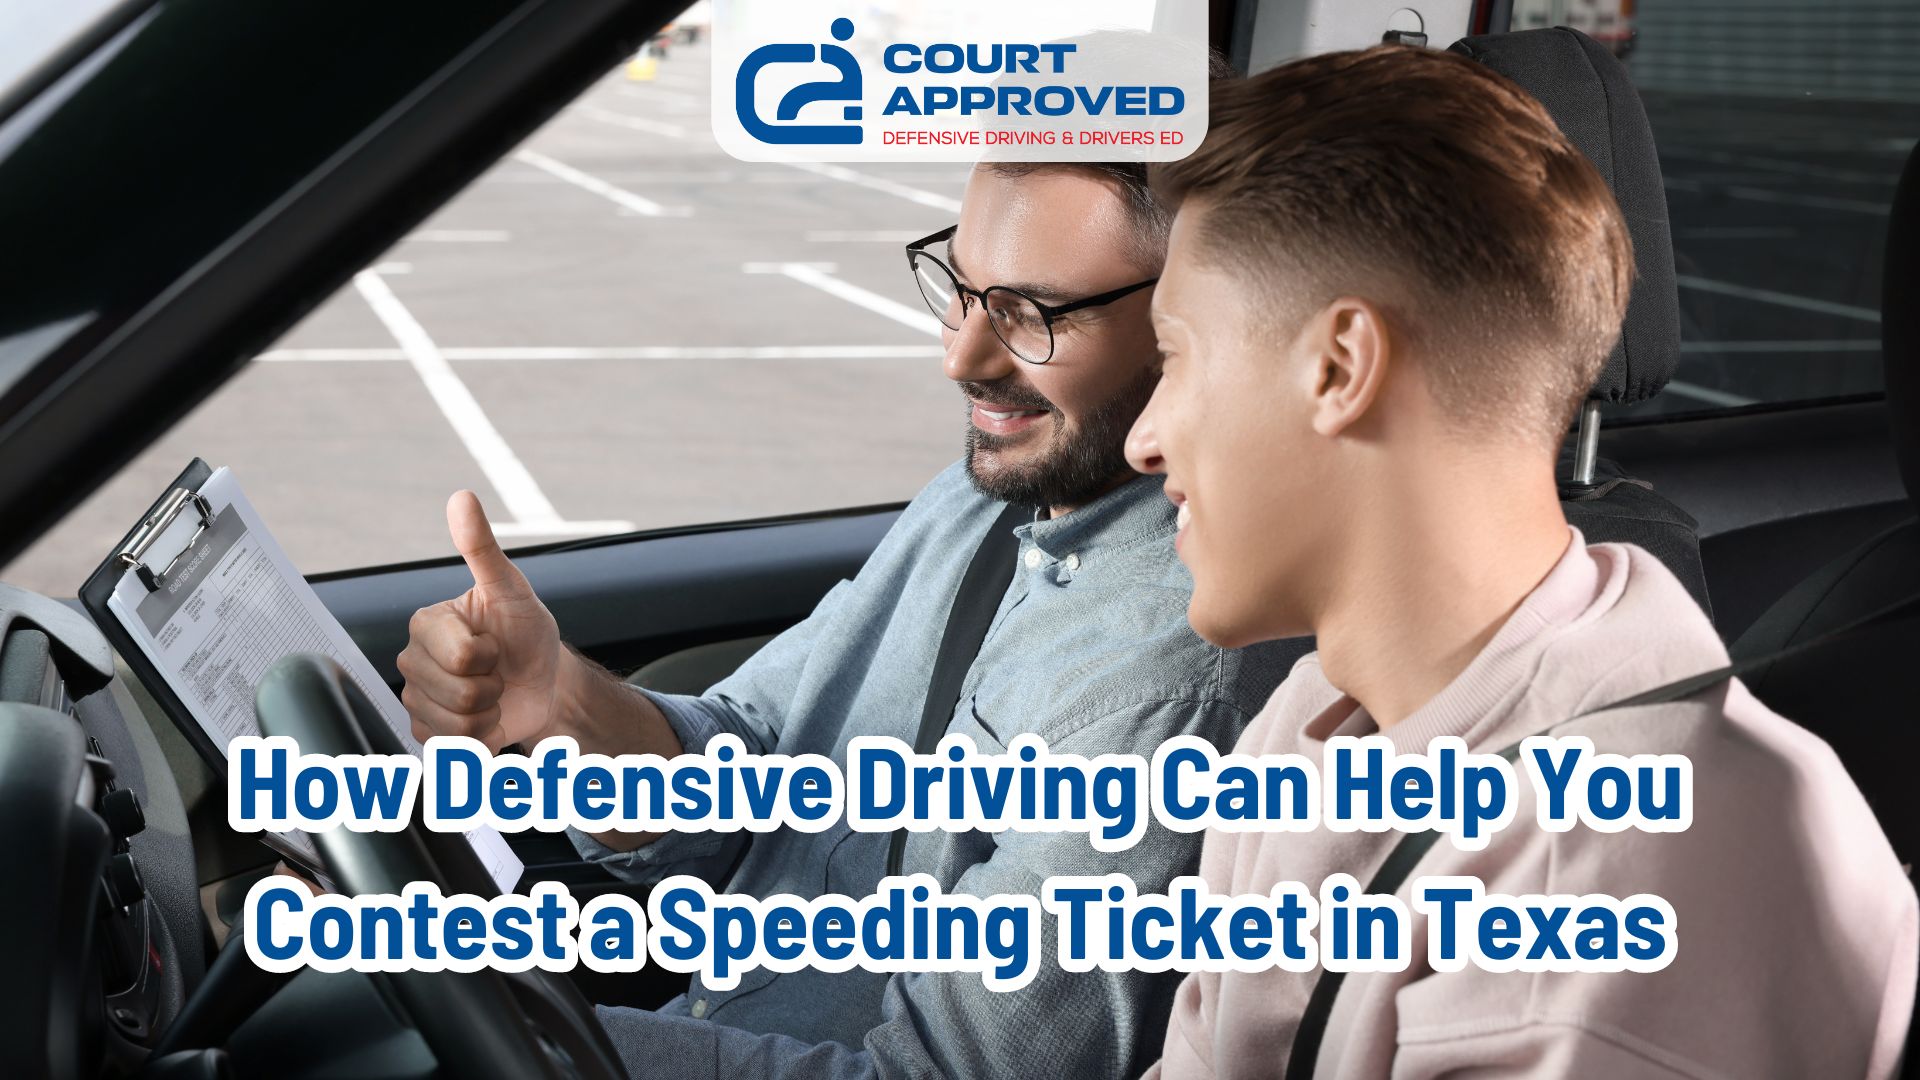 How Defensive Driving Can Help You Contest a Speeding Ticket in Texas